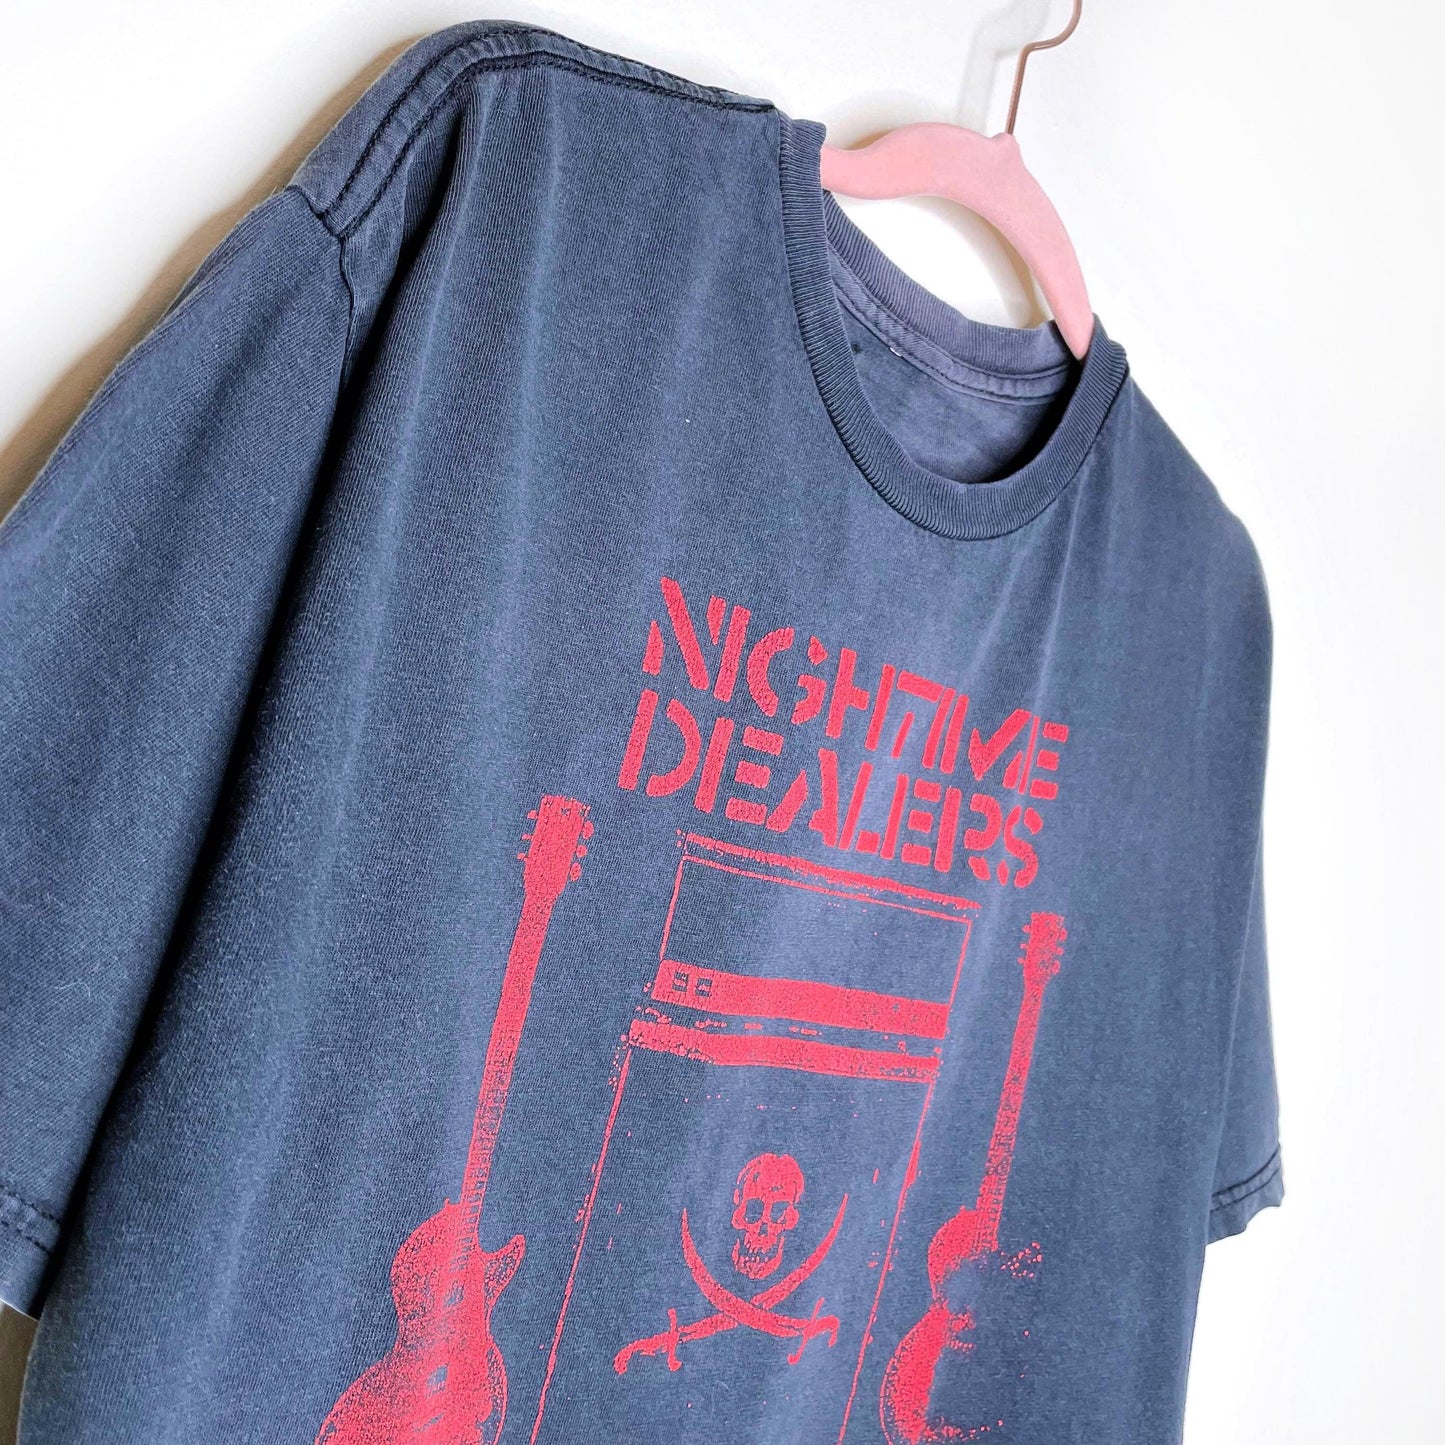 vintage nightime dealers wttn band tee - size small